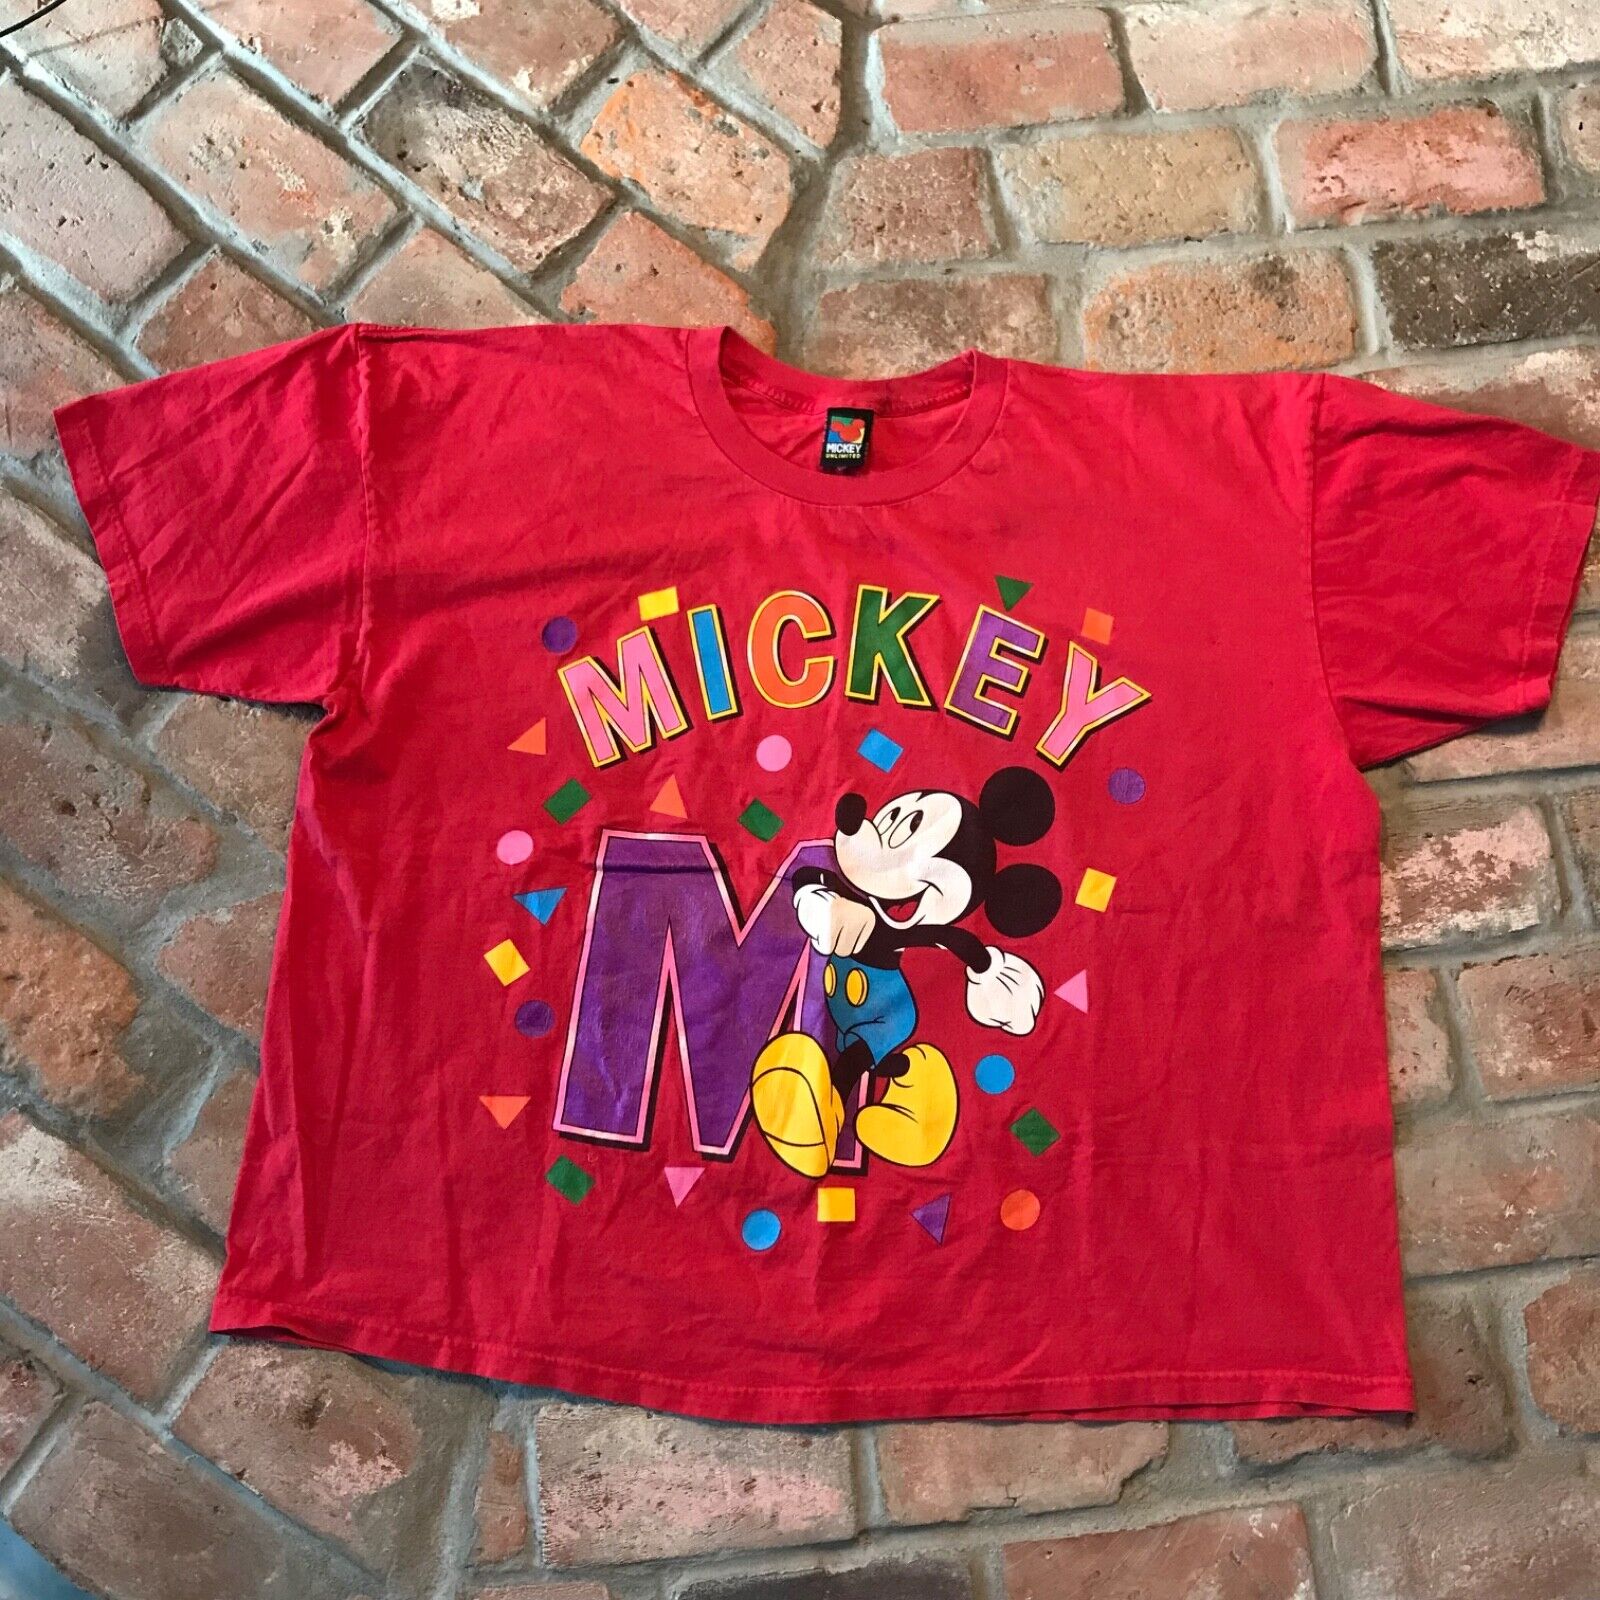 Vintage Mickey Unlimited. Tag size faded.